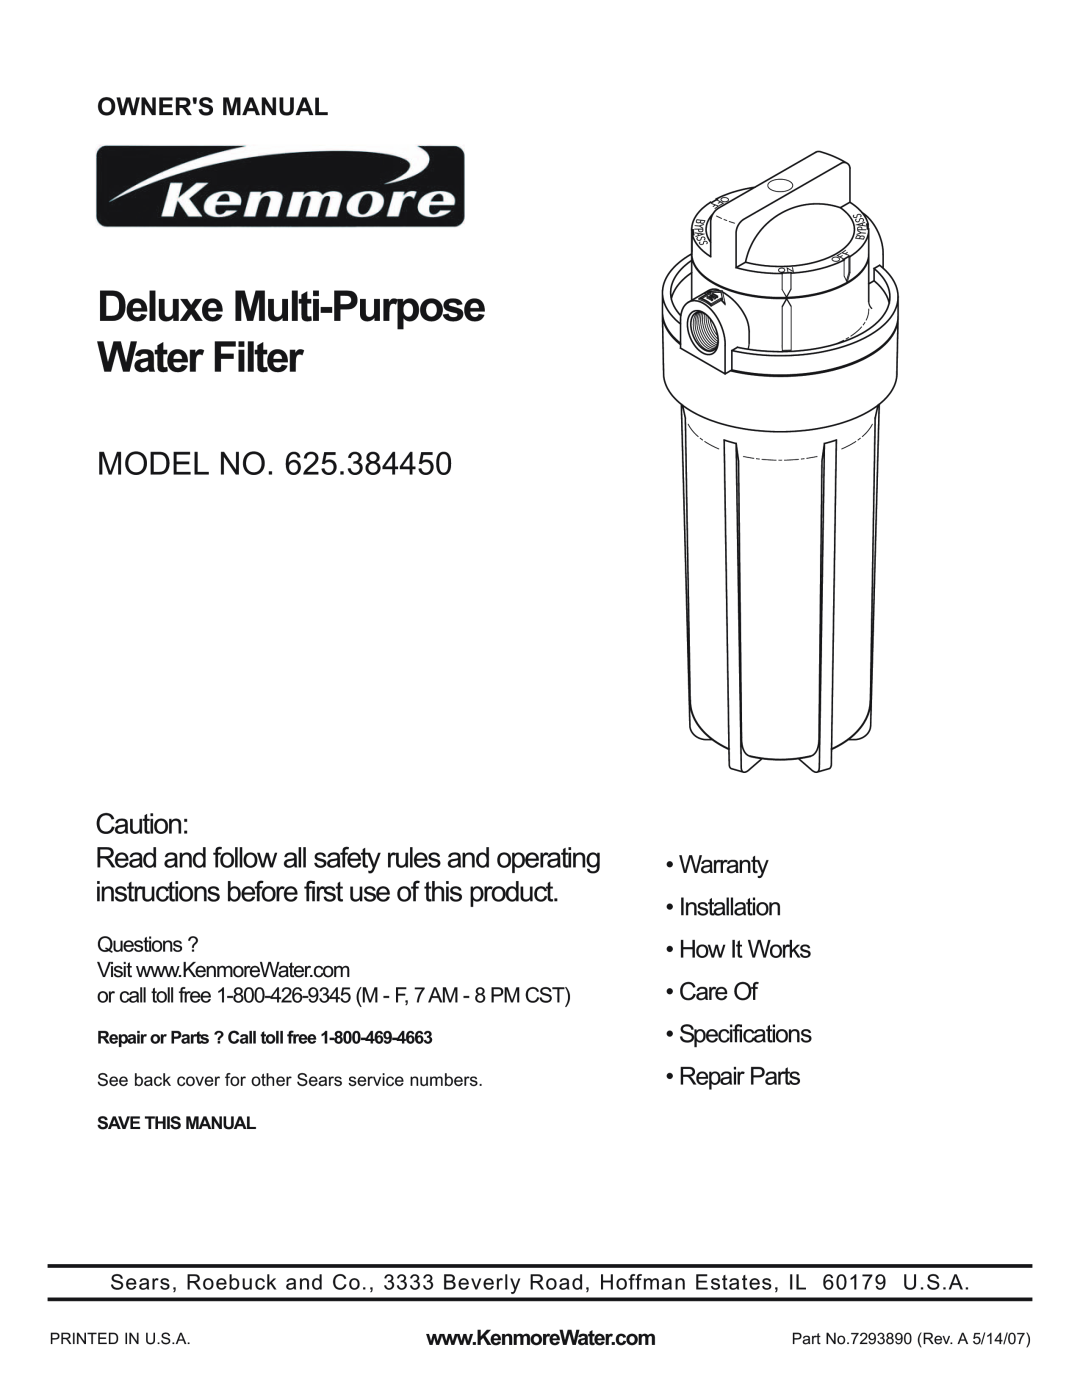 Kenmore 625.38445 owner manual Deluxe Multi-Purpose Water Filter, Model No, Questions ?, Repair or Parts ? Call toll free 